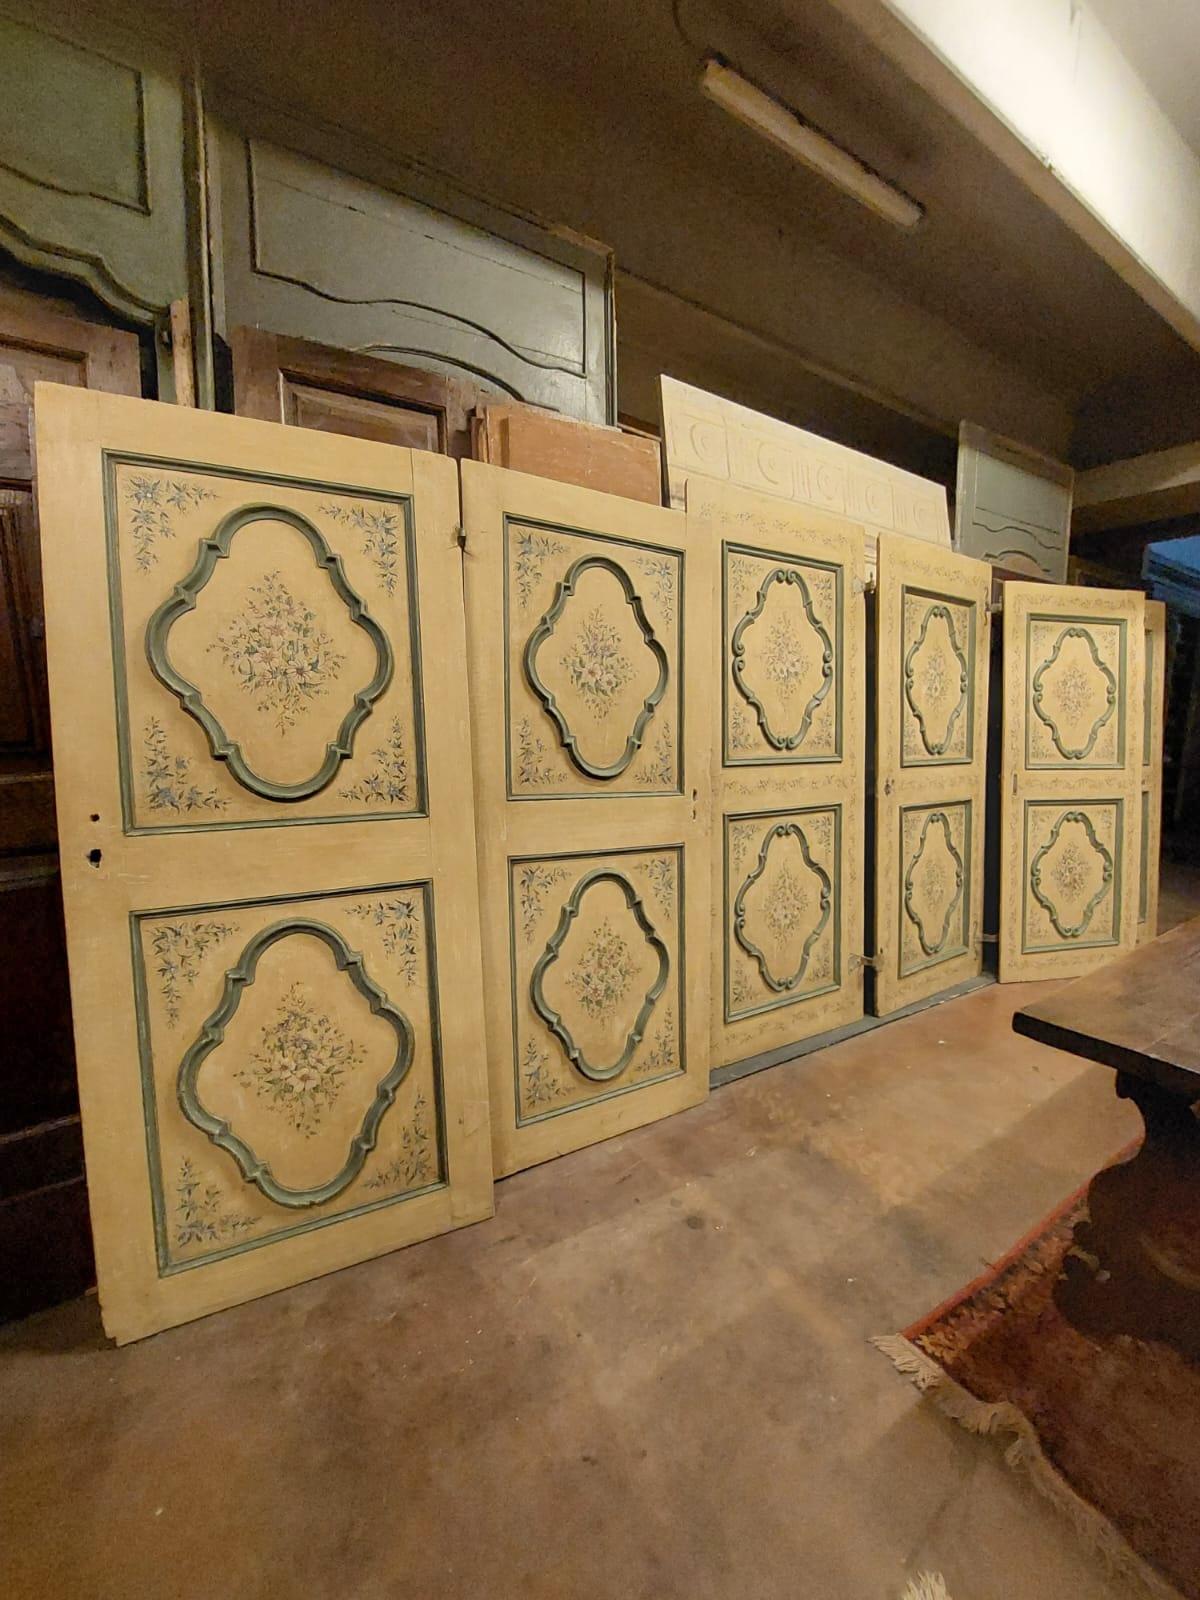 N.4 Ancient interior doors painted and lacquered, carved with a Baroque motif and decorated on both sides, from the early 18th century, built and hand painted for an important building in central Italy.
Beautiful and hard to find in sets of 4, we